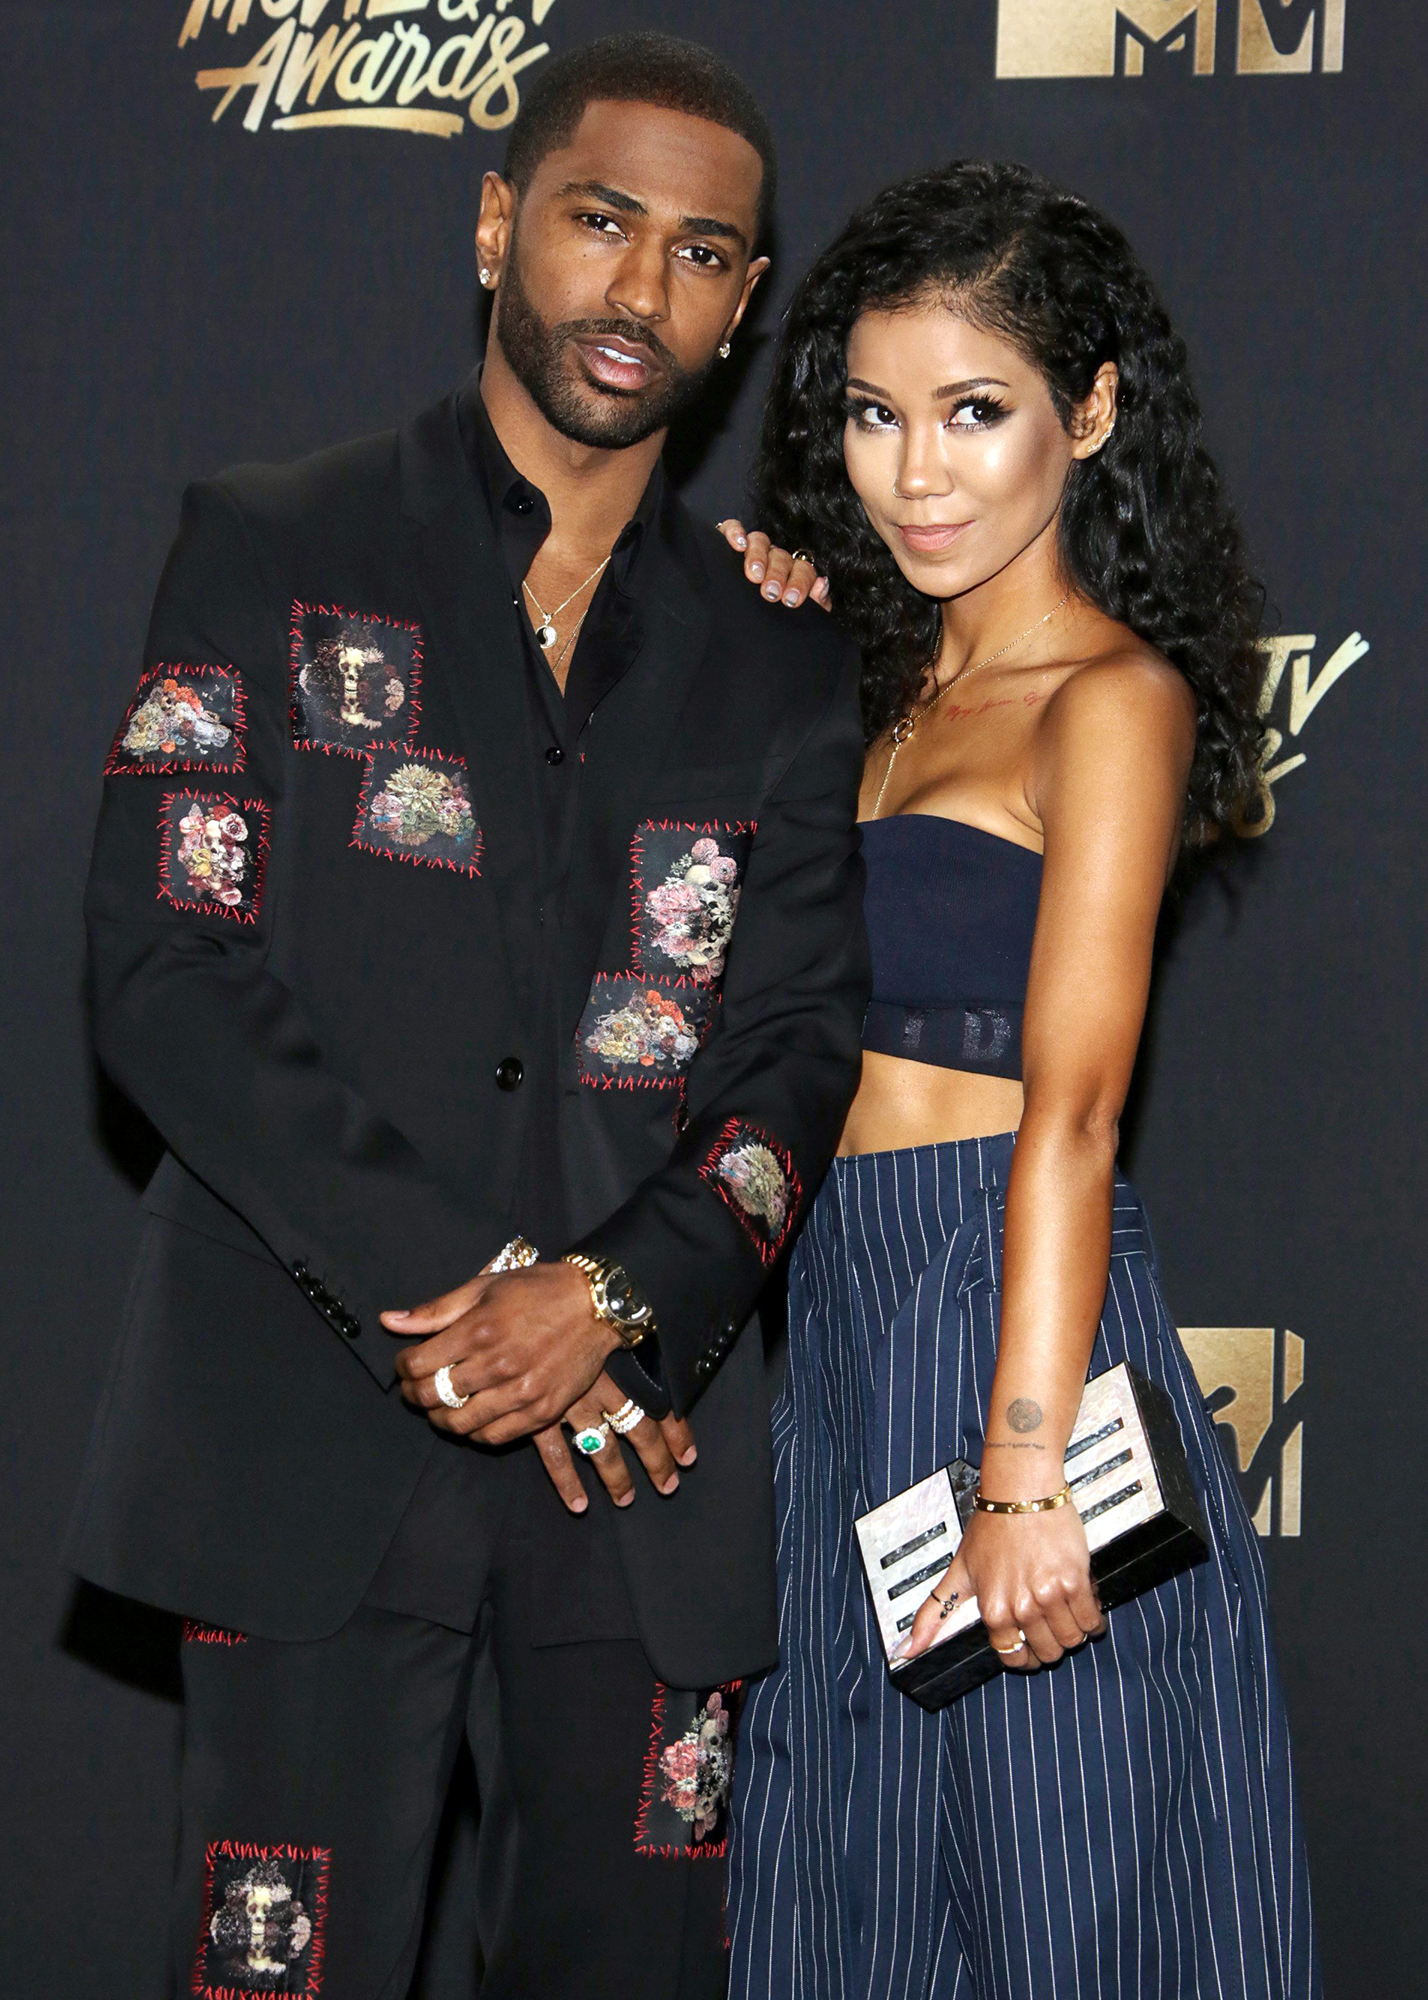 Jhene Aiko Is Pregnant, Expecting 1st Child With Longtime Partner Big Sean: Report